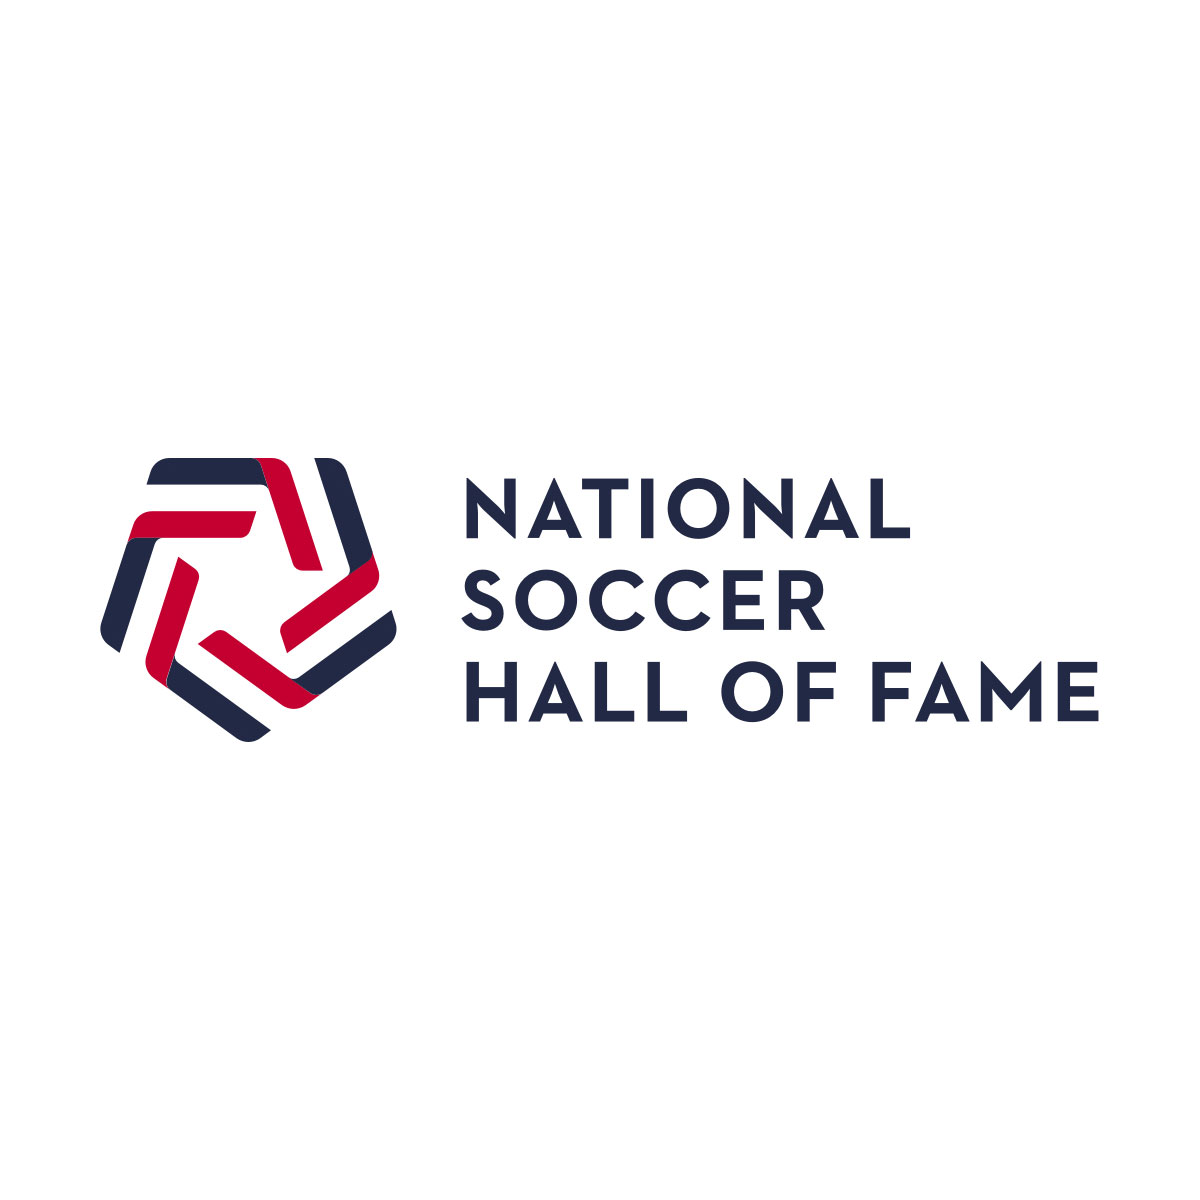 National Soccer Hall of Fame Announces Final Ballots for Election to